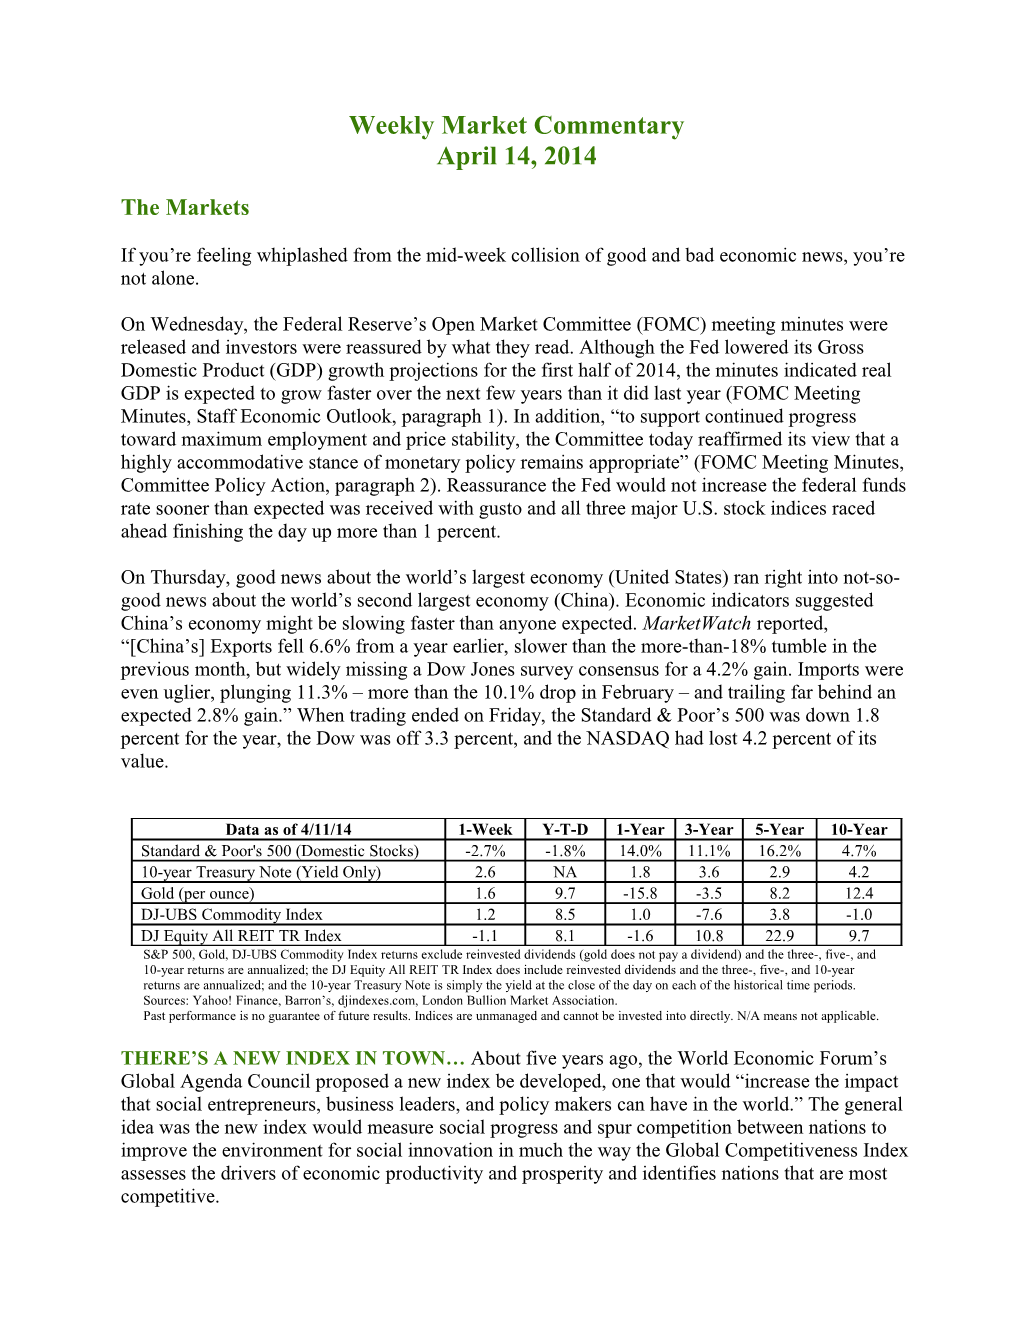 Weekly Commentary 04-14-14 PAA